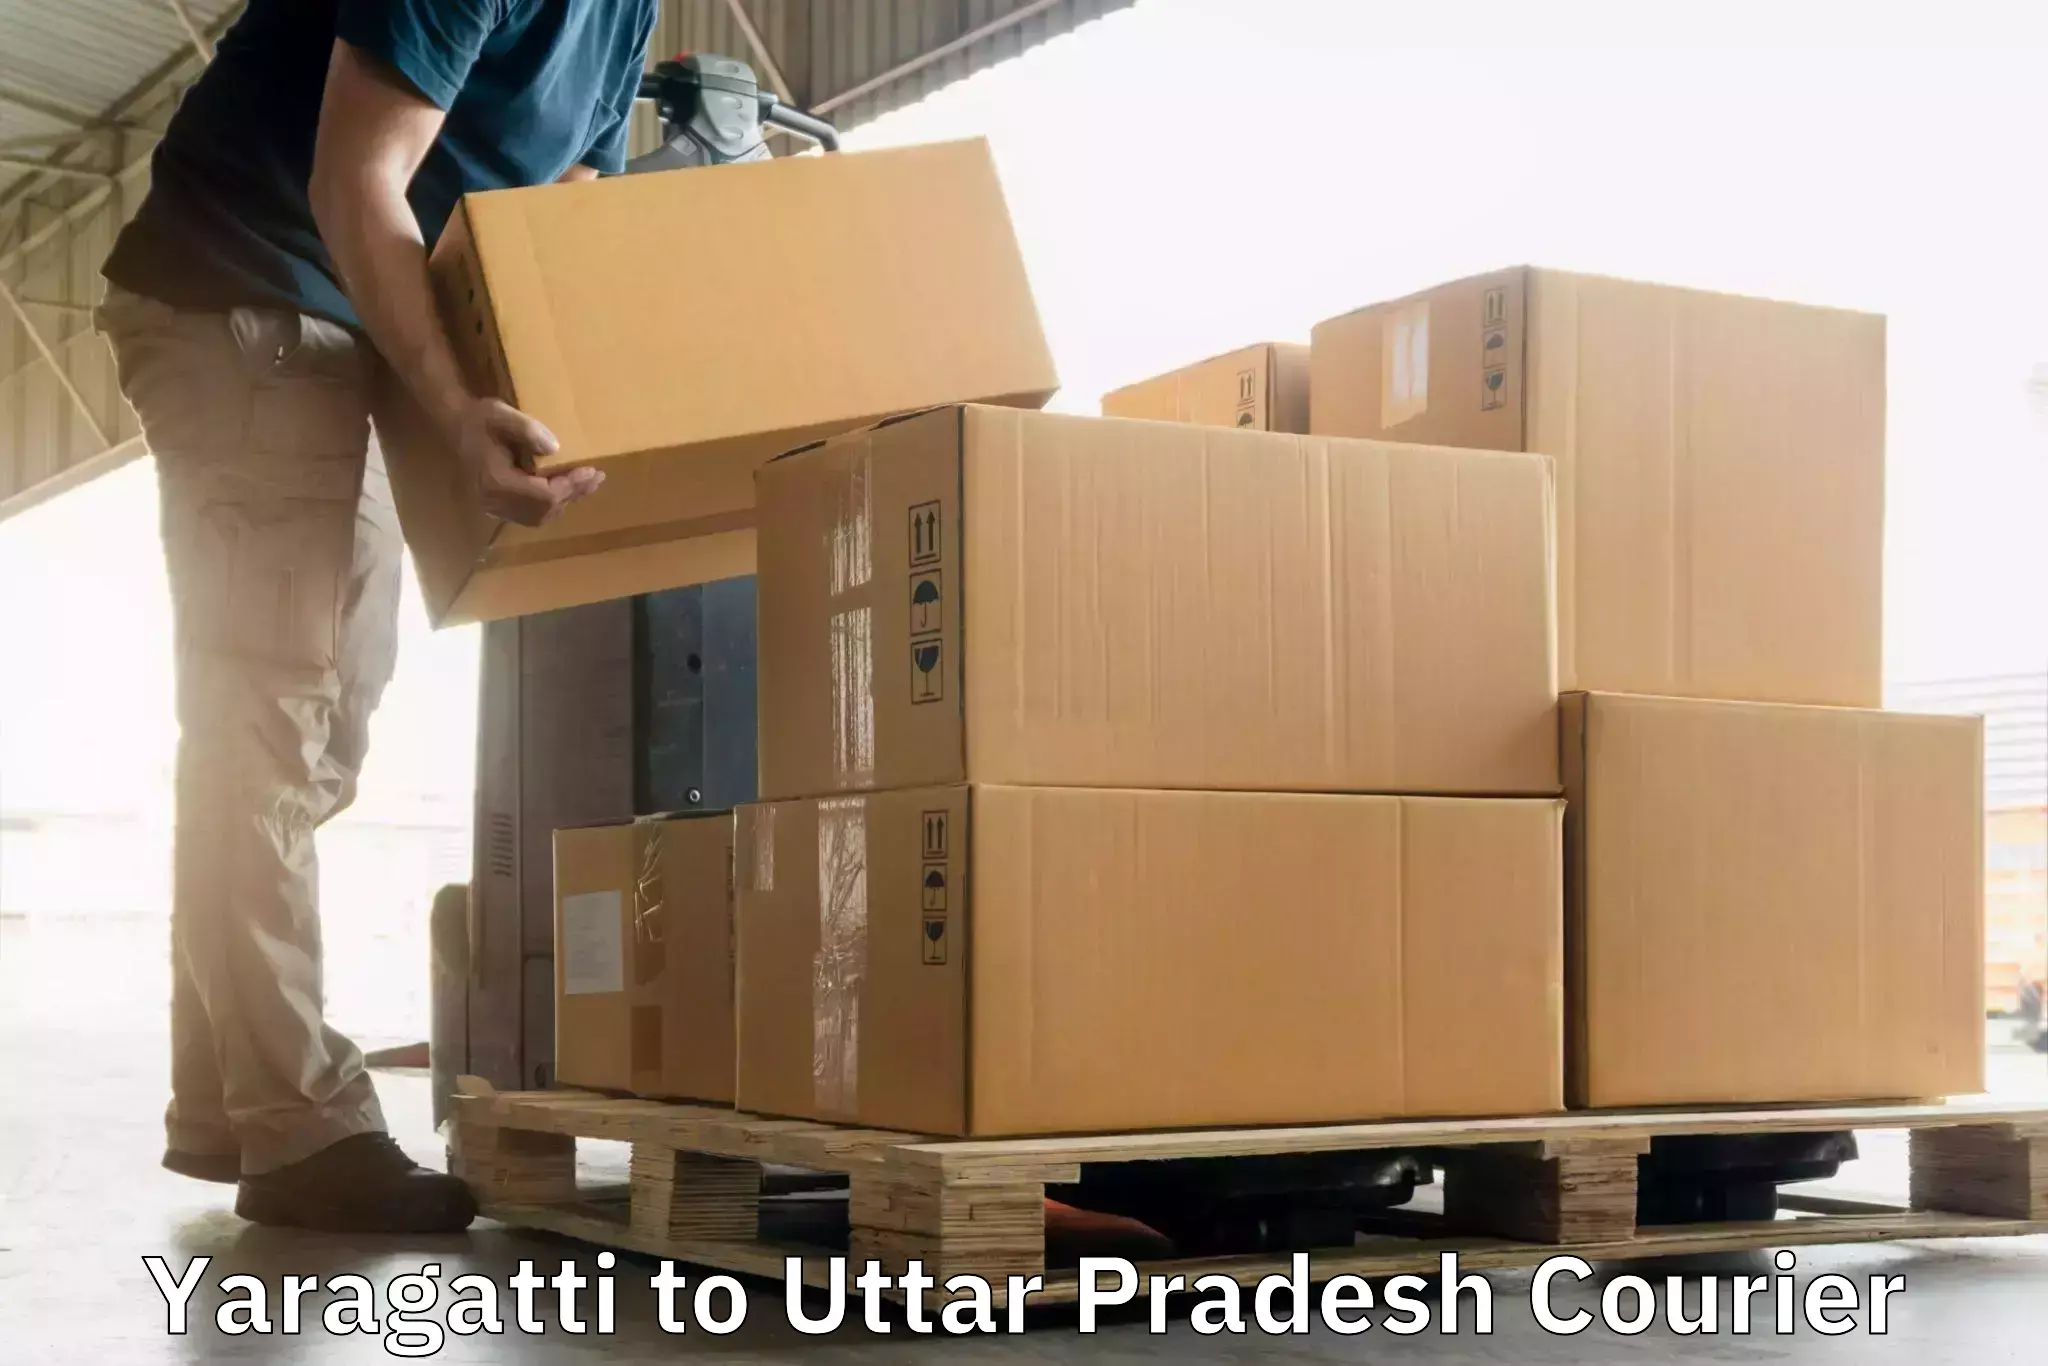 Courier service innovation Yaragatti to Kanpur